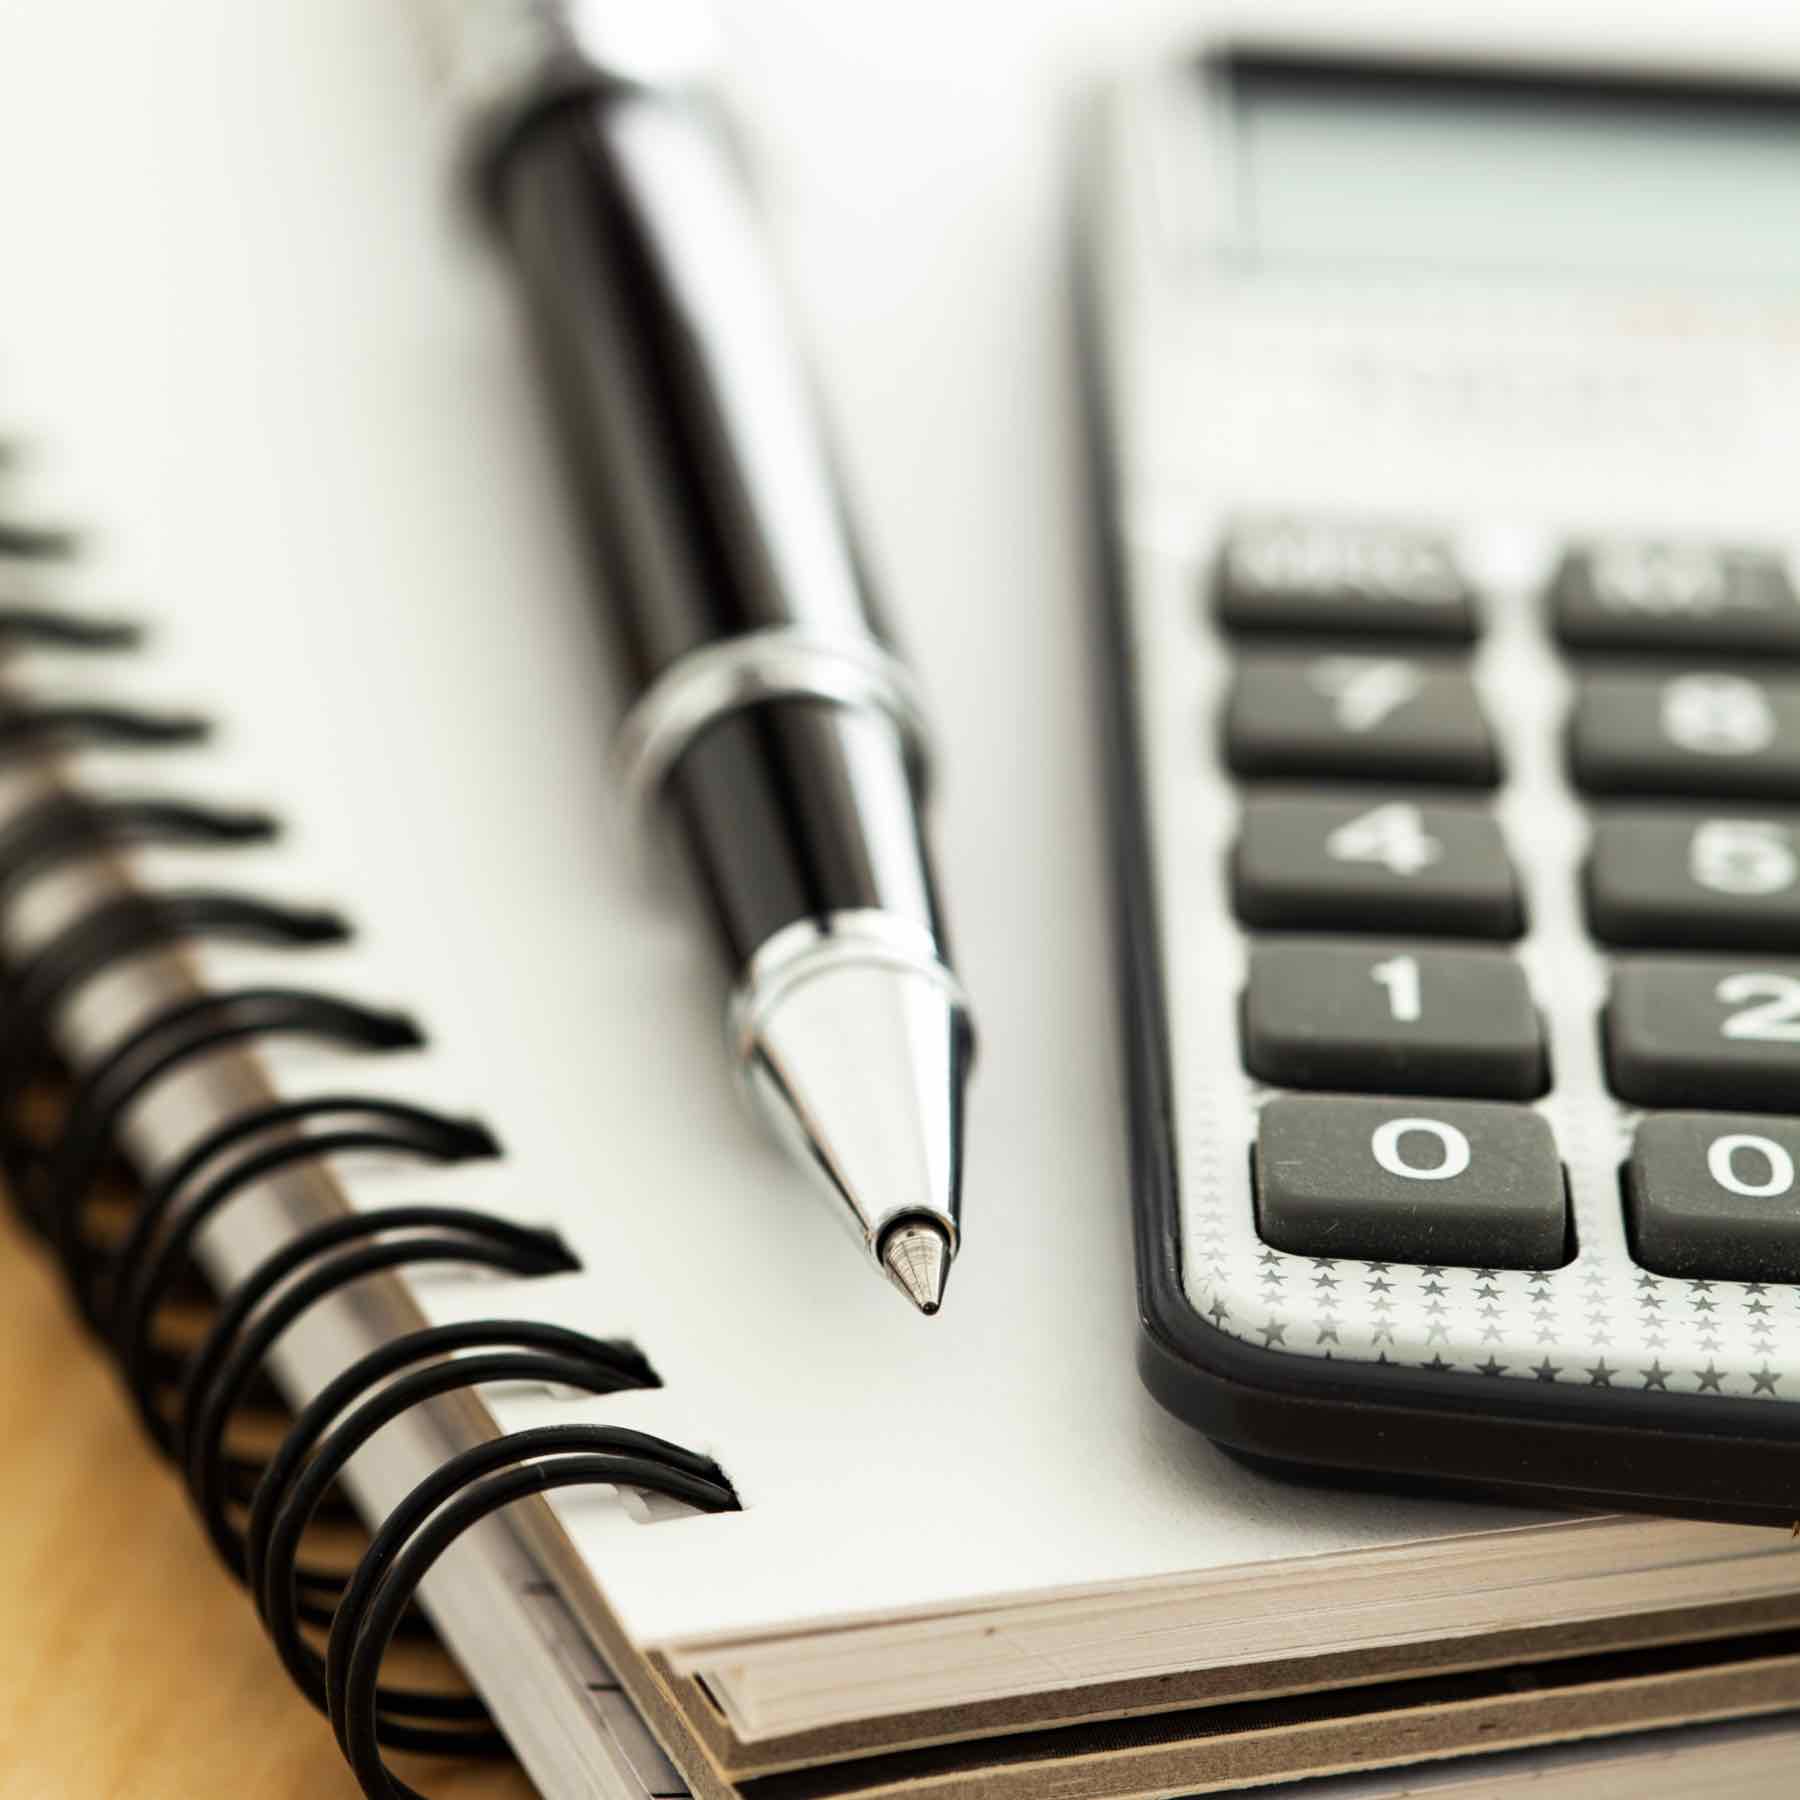 Tracking your revenue and expenses is a vital part of bookkeeping - Paramount Tax & Accounting can help.